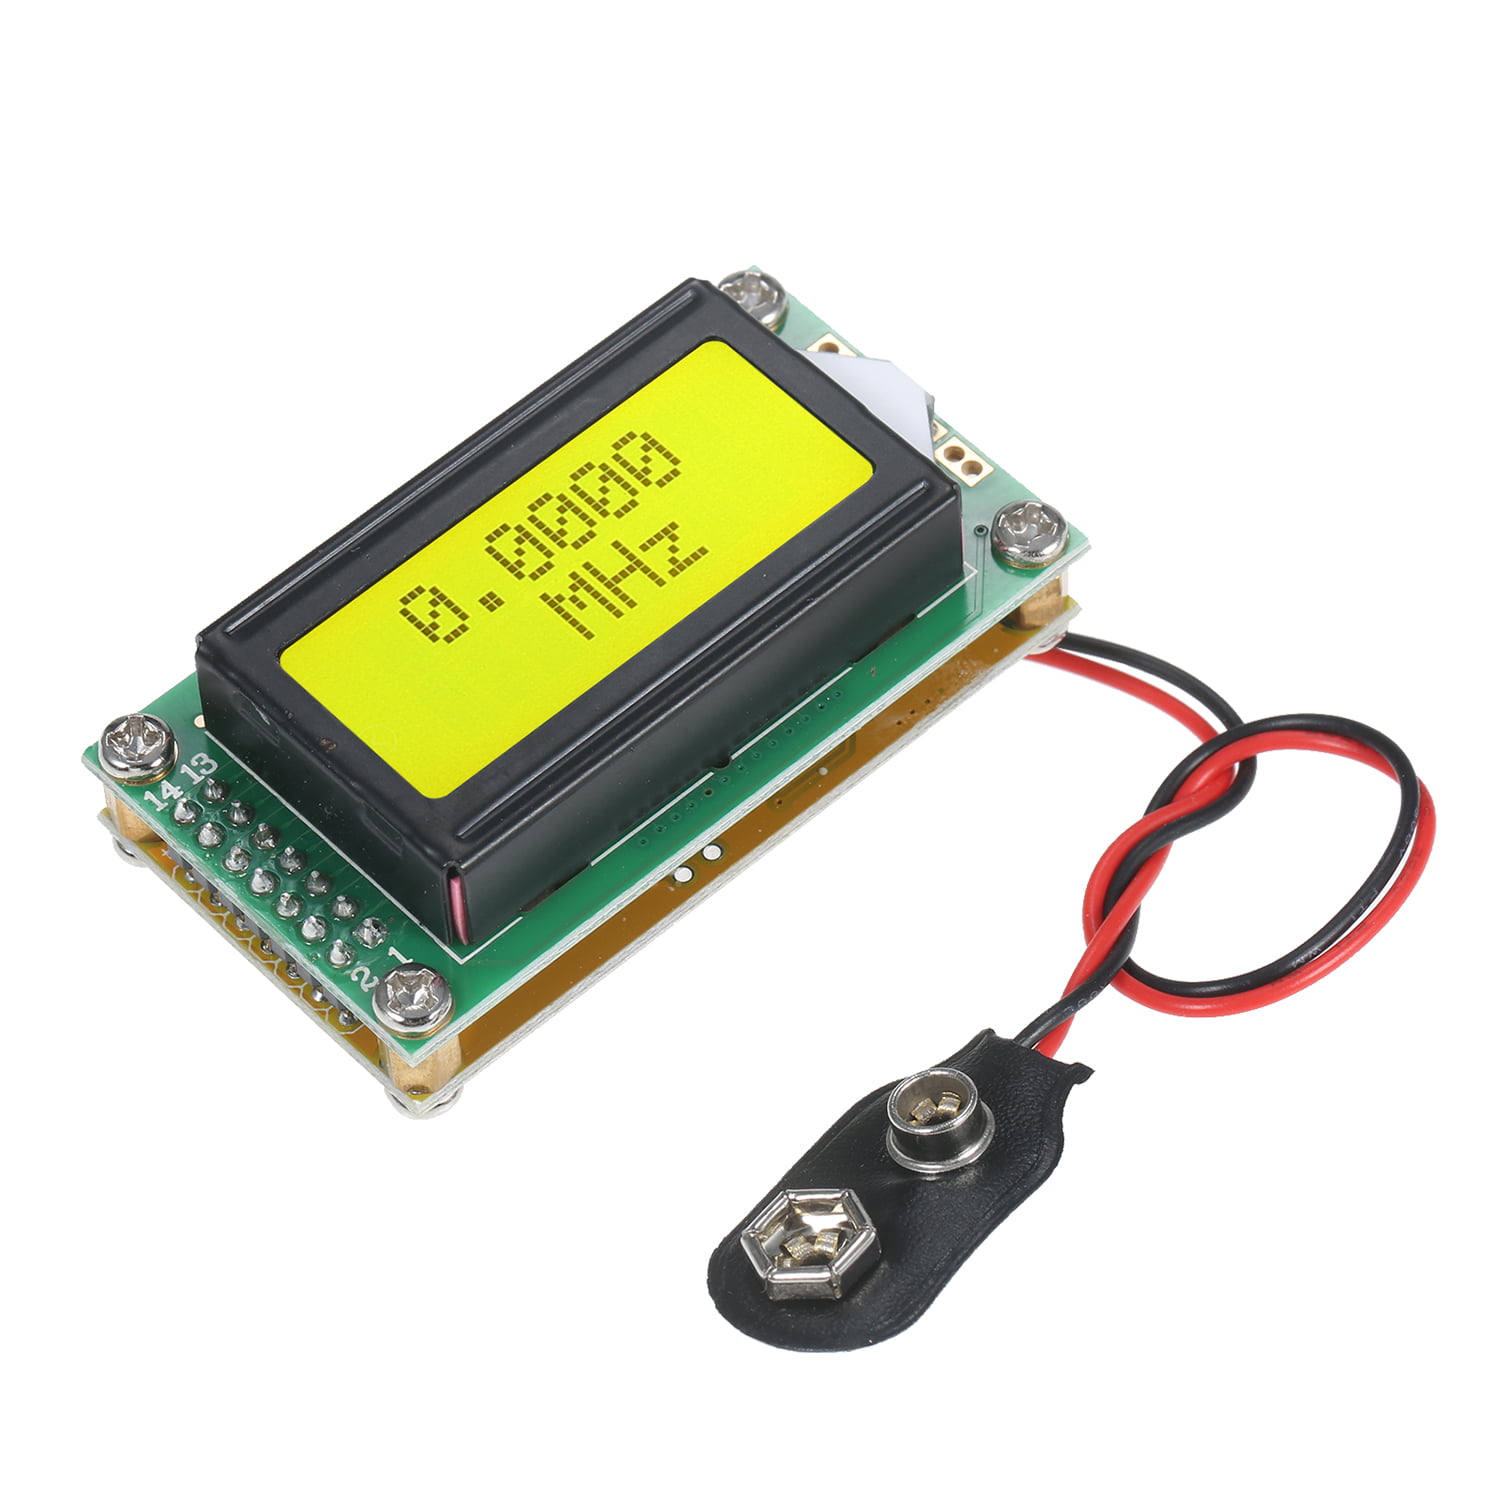 1 Set 1 MHz 1.1GHz LED Frequency Counter Tester For Frequency Radio PLJ-0802-F 